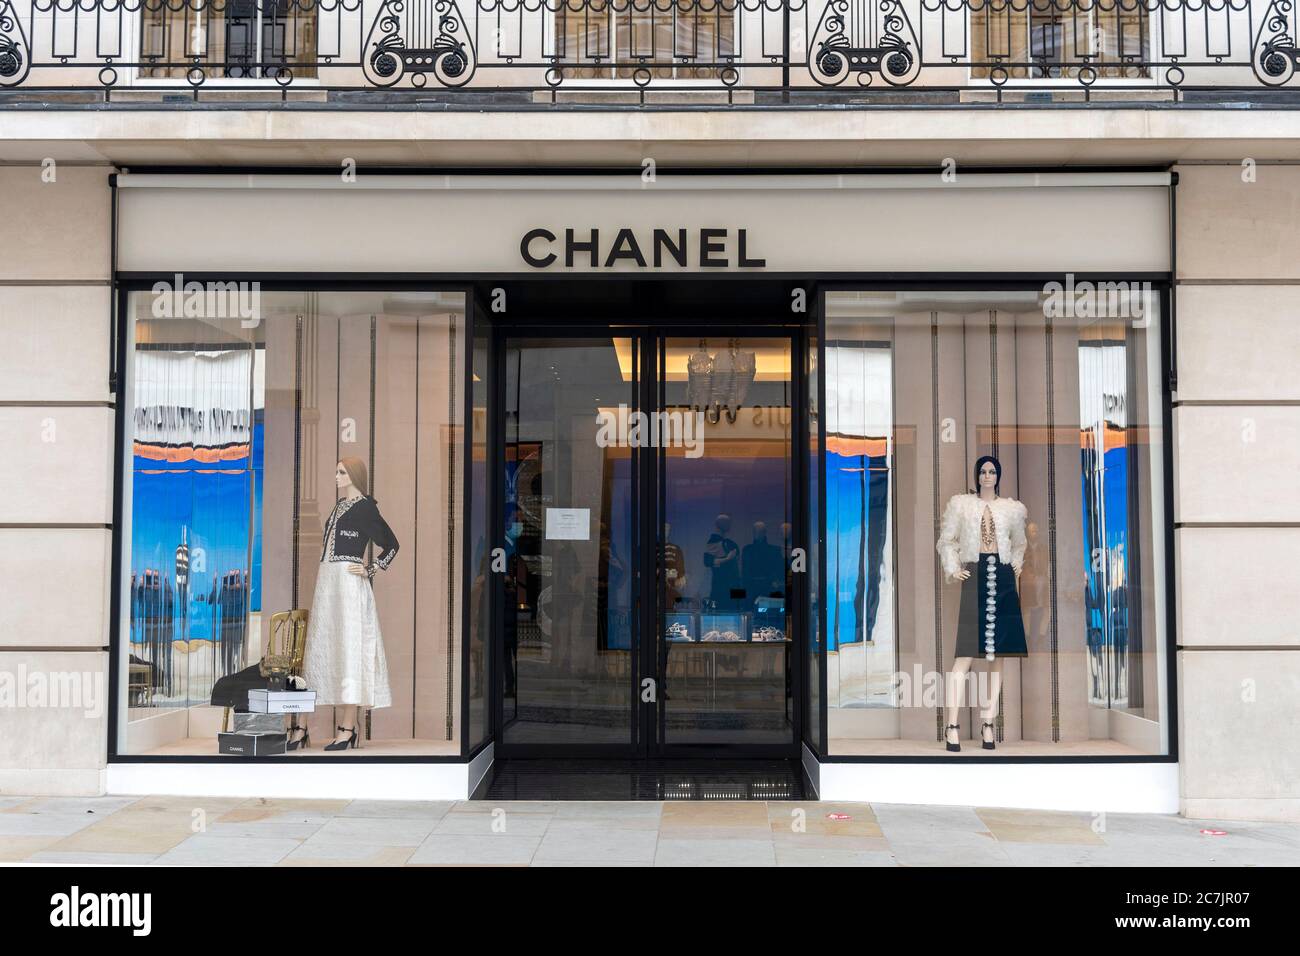 London, UK. 16th July, 2020. Storefront of the Chanel store in the ...